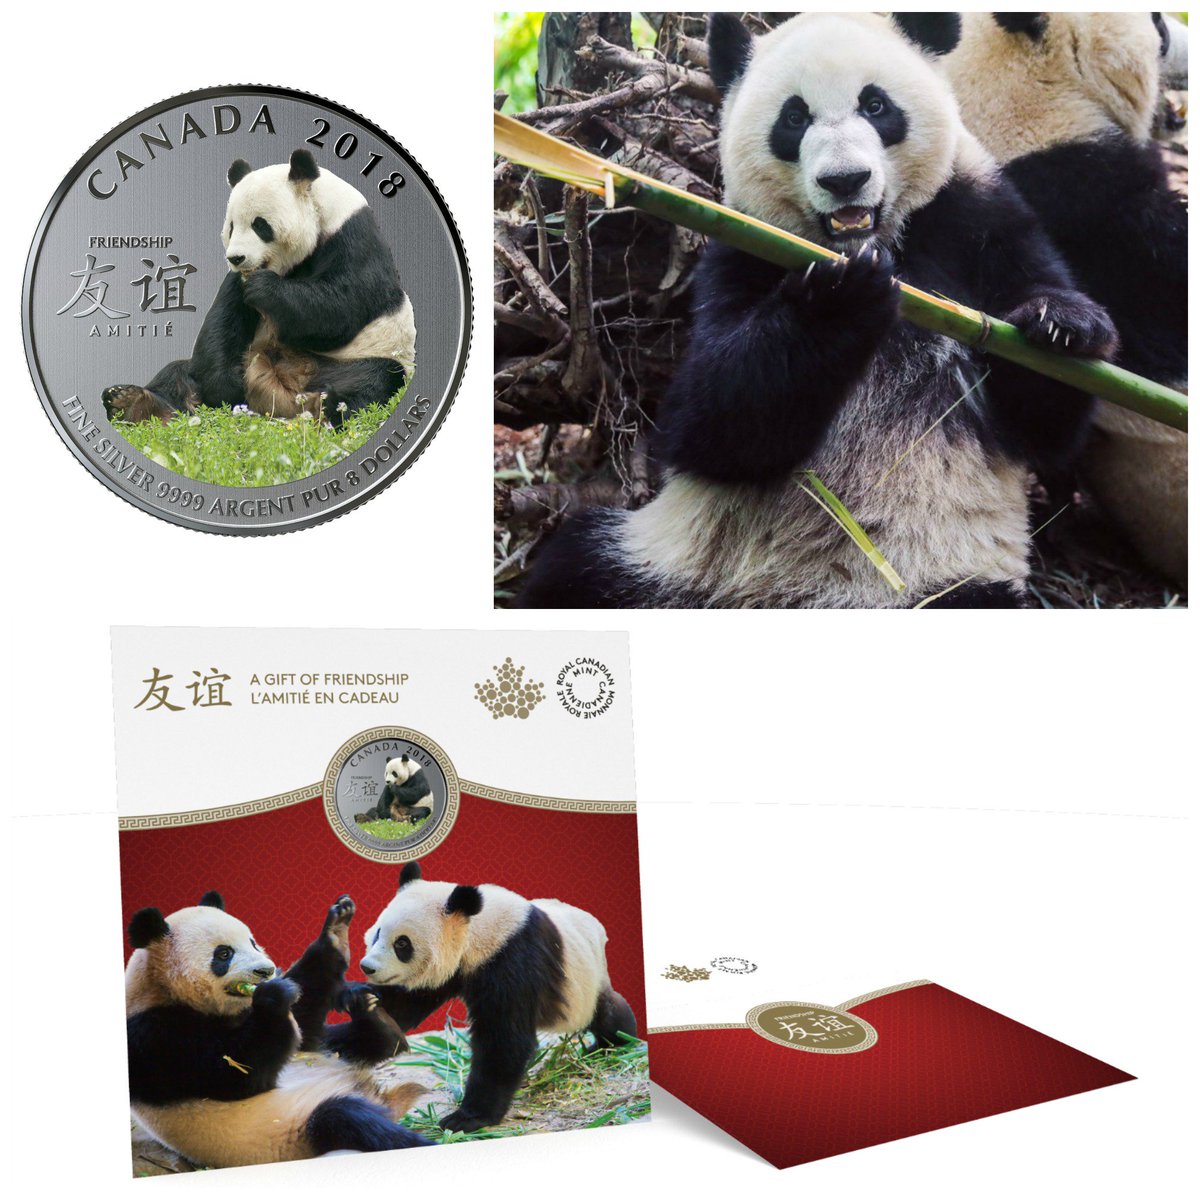 Did you see last week's debut? @CanadianMint unveiled an adorable panda silver coin in celebration of our giant pandas at Panda Passage! The keepsake, a symbol of friendship& goodwill, is available at mint.ca Canada Post outlets. #TBT #royalcanadianmint #pandacoin